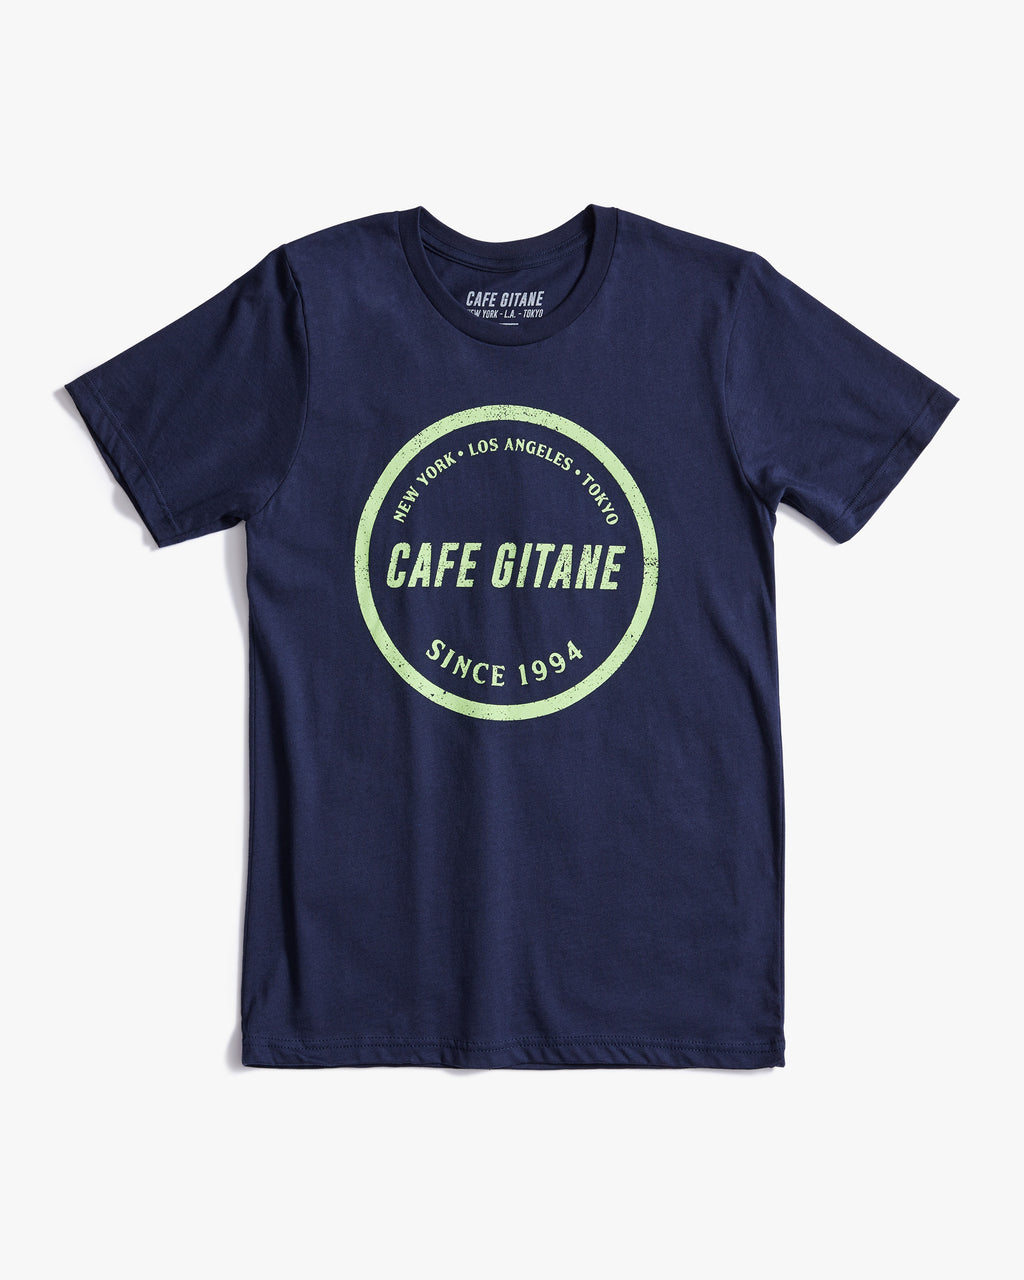 The Cafe Gitane Stamped Logo Tee is 100% organic cotton and made in the USA. The classic t-shirt in navy blue and printed with a green logo in a stamped structure, with non-toxic ink. The print ins circular in the middle of the front chest. The logo features each city Cafe Gitane has a location in: New York, Los Angeles, and Tokyo, as well as when the first location opened: 1994. 